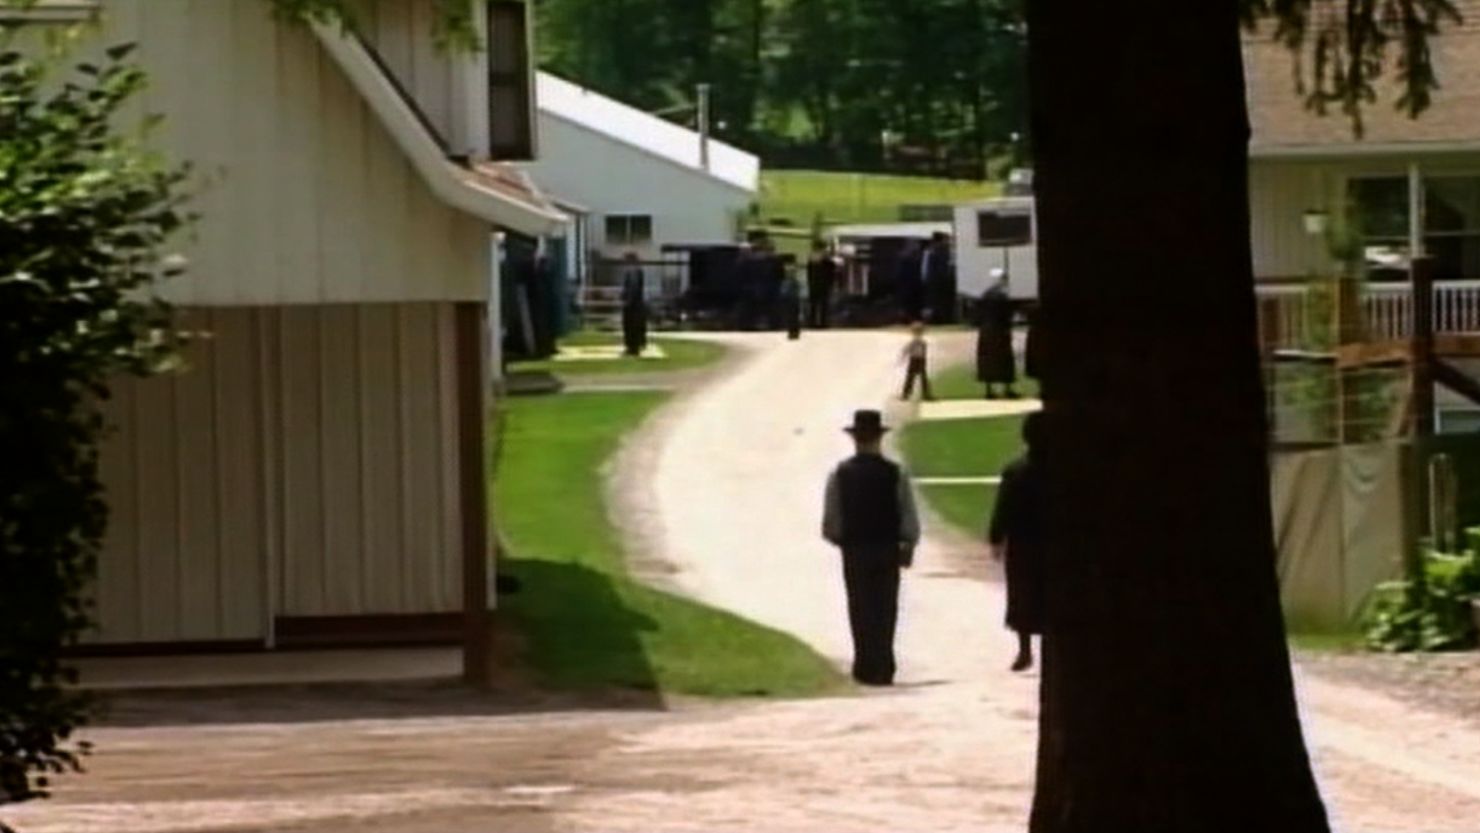 Four alleged attacks have taken place in an Ohio Amish community since September 6, the local sheriff says.